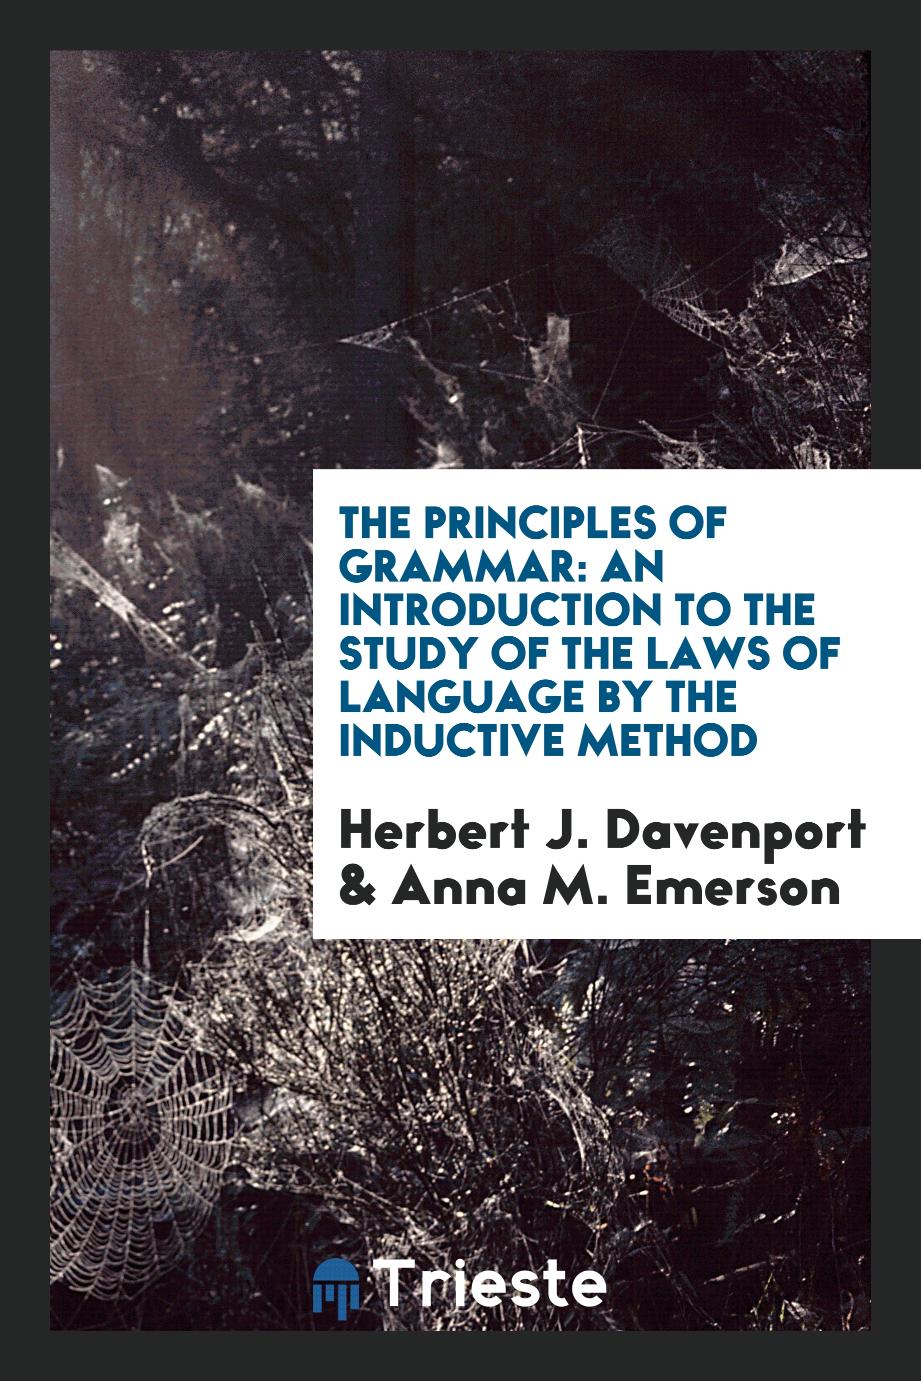 The Principles of Grammar: An Introduction to the Study of the Laws of Language by the Inductive Method